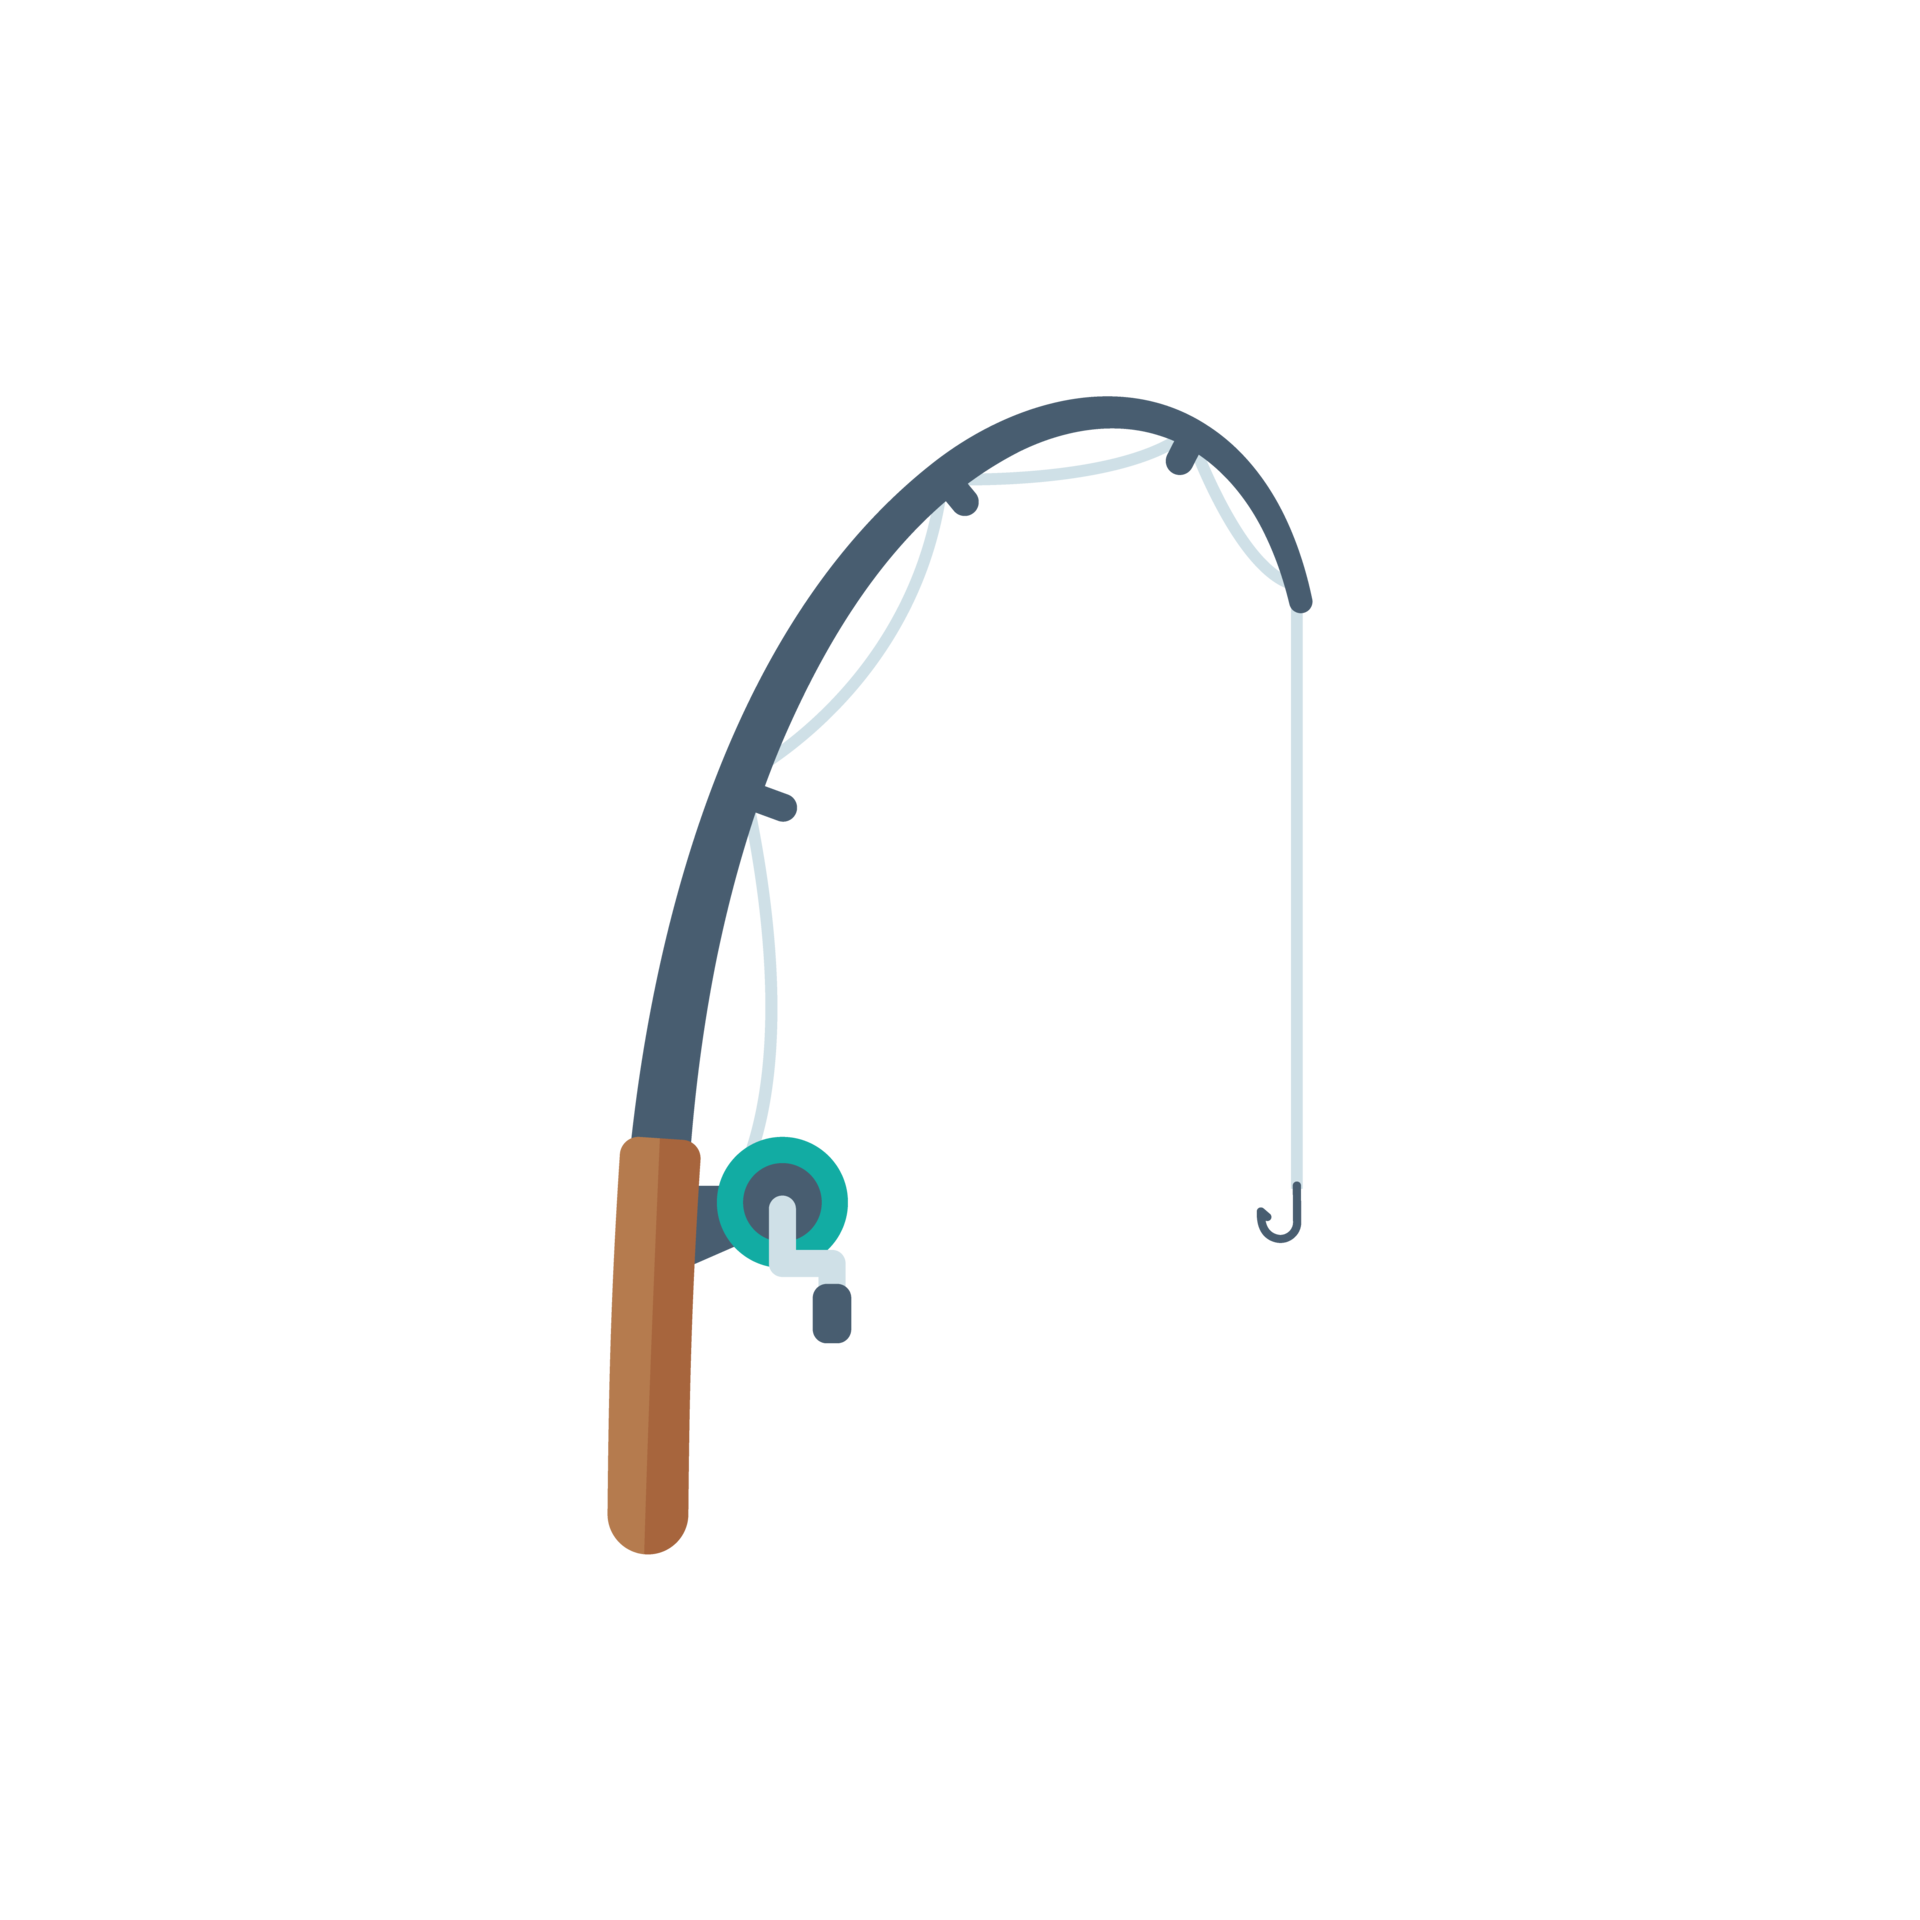 https://static.vecteezy.com/system/resources/previews/014/493/280/original/fishing-rod-with-fishing-line-fishermen-leisure-activities-png.png